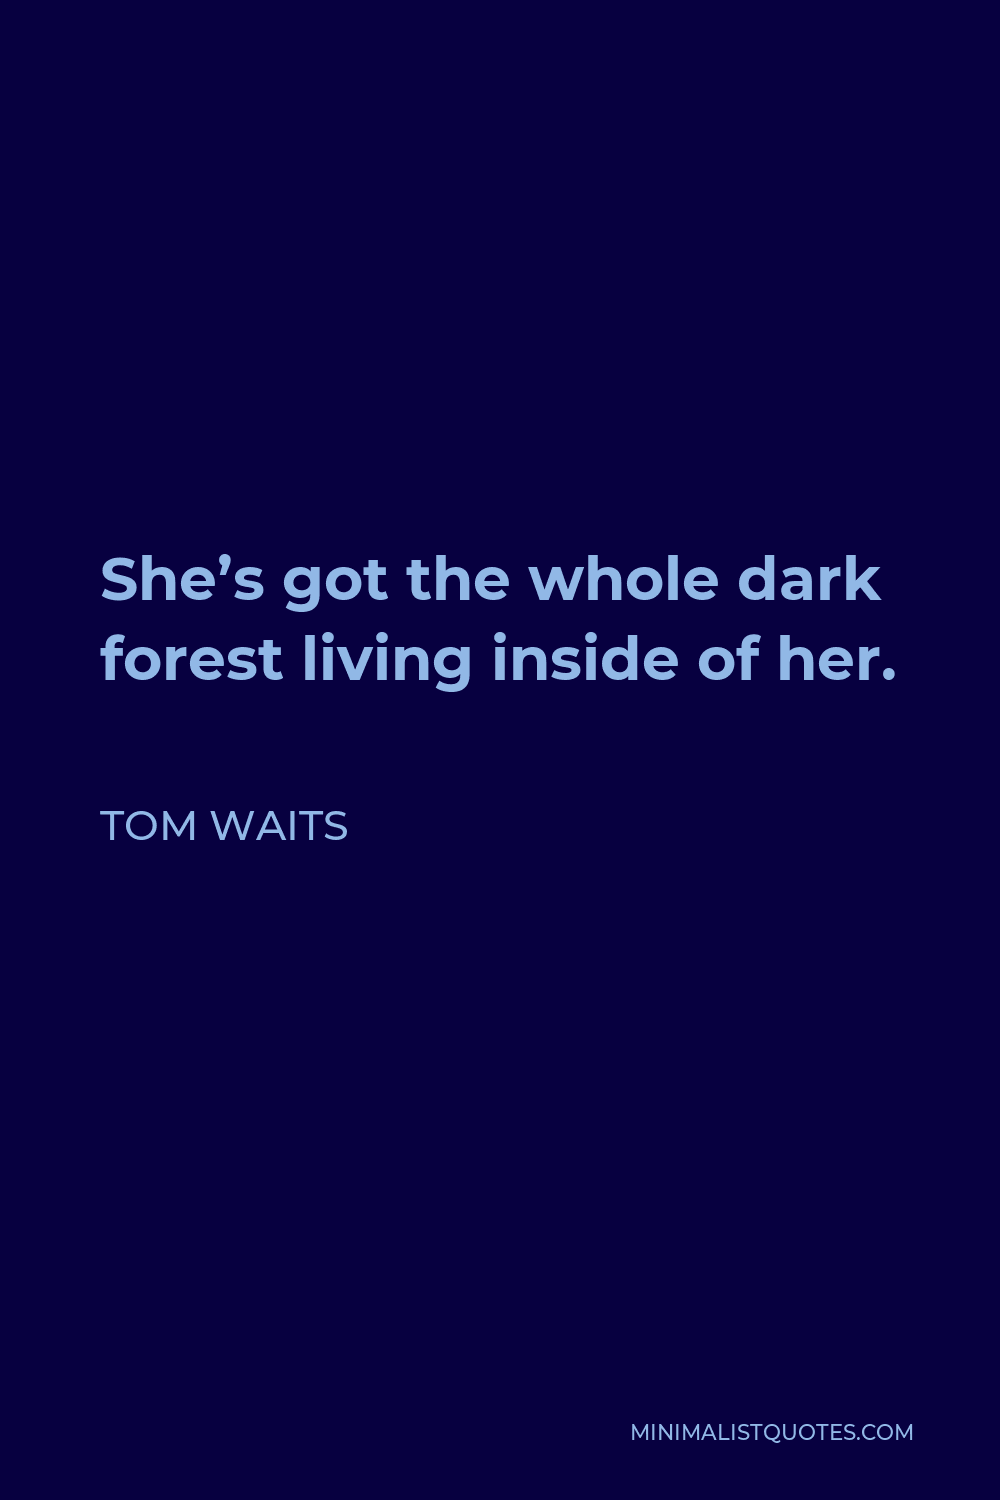 Tom Waits Quote - She’s got the whole dark forest living inside of her.